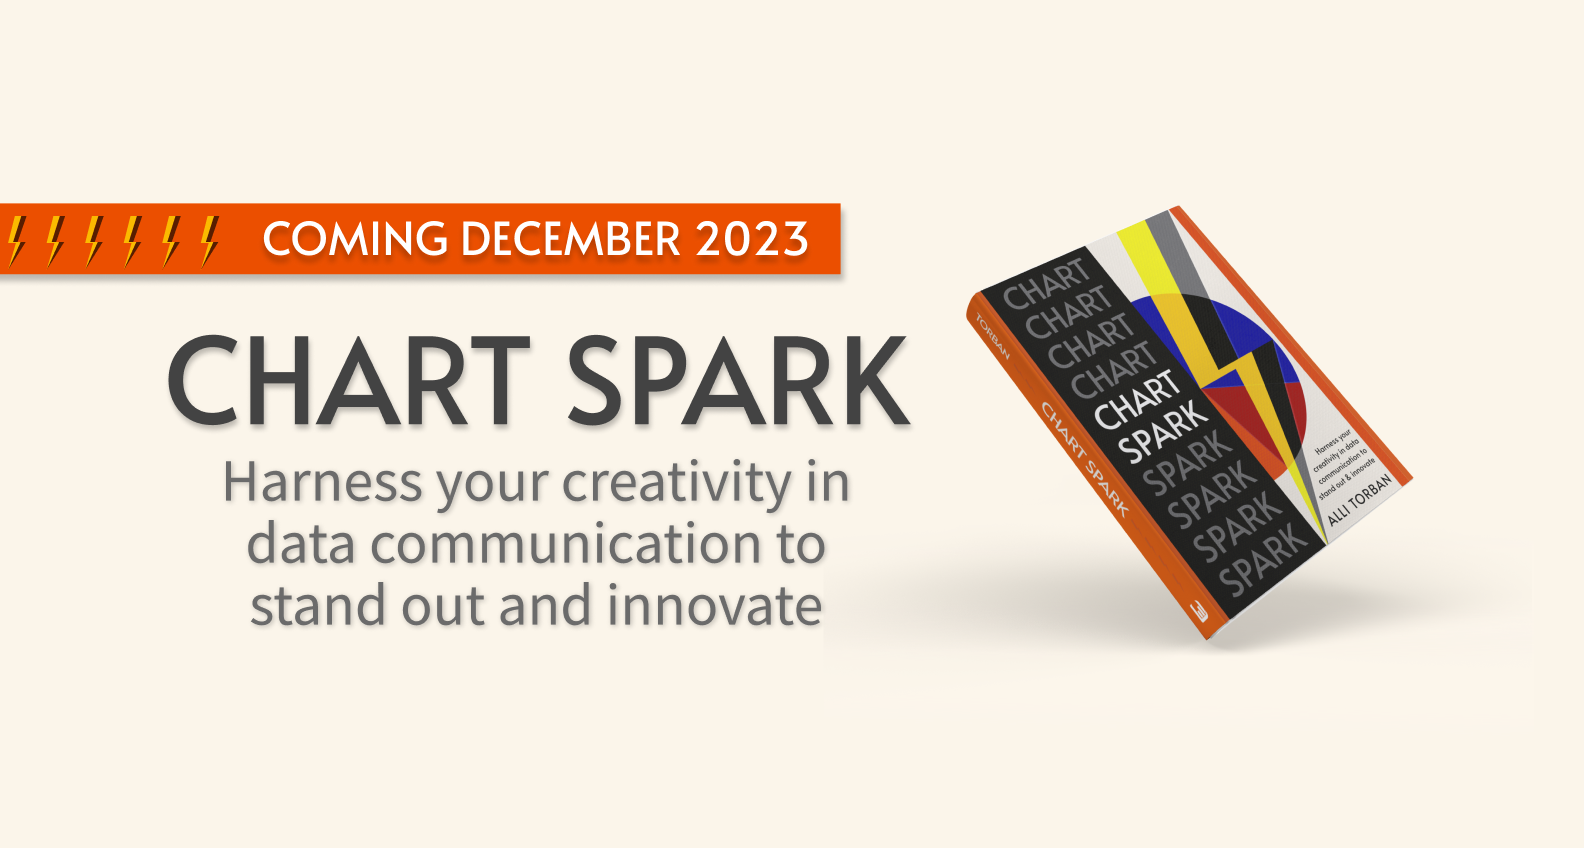 Coming December 2023: Chart Spark: Harness your creativity in data communication to stand out and innovate